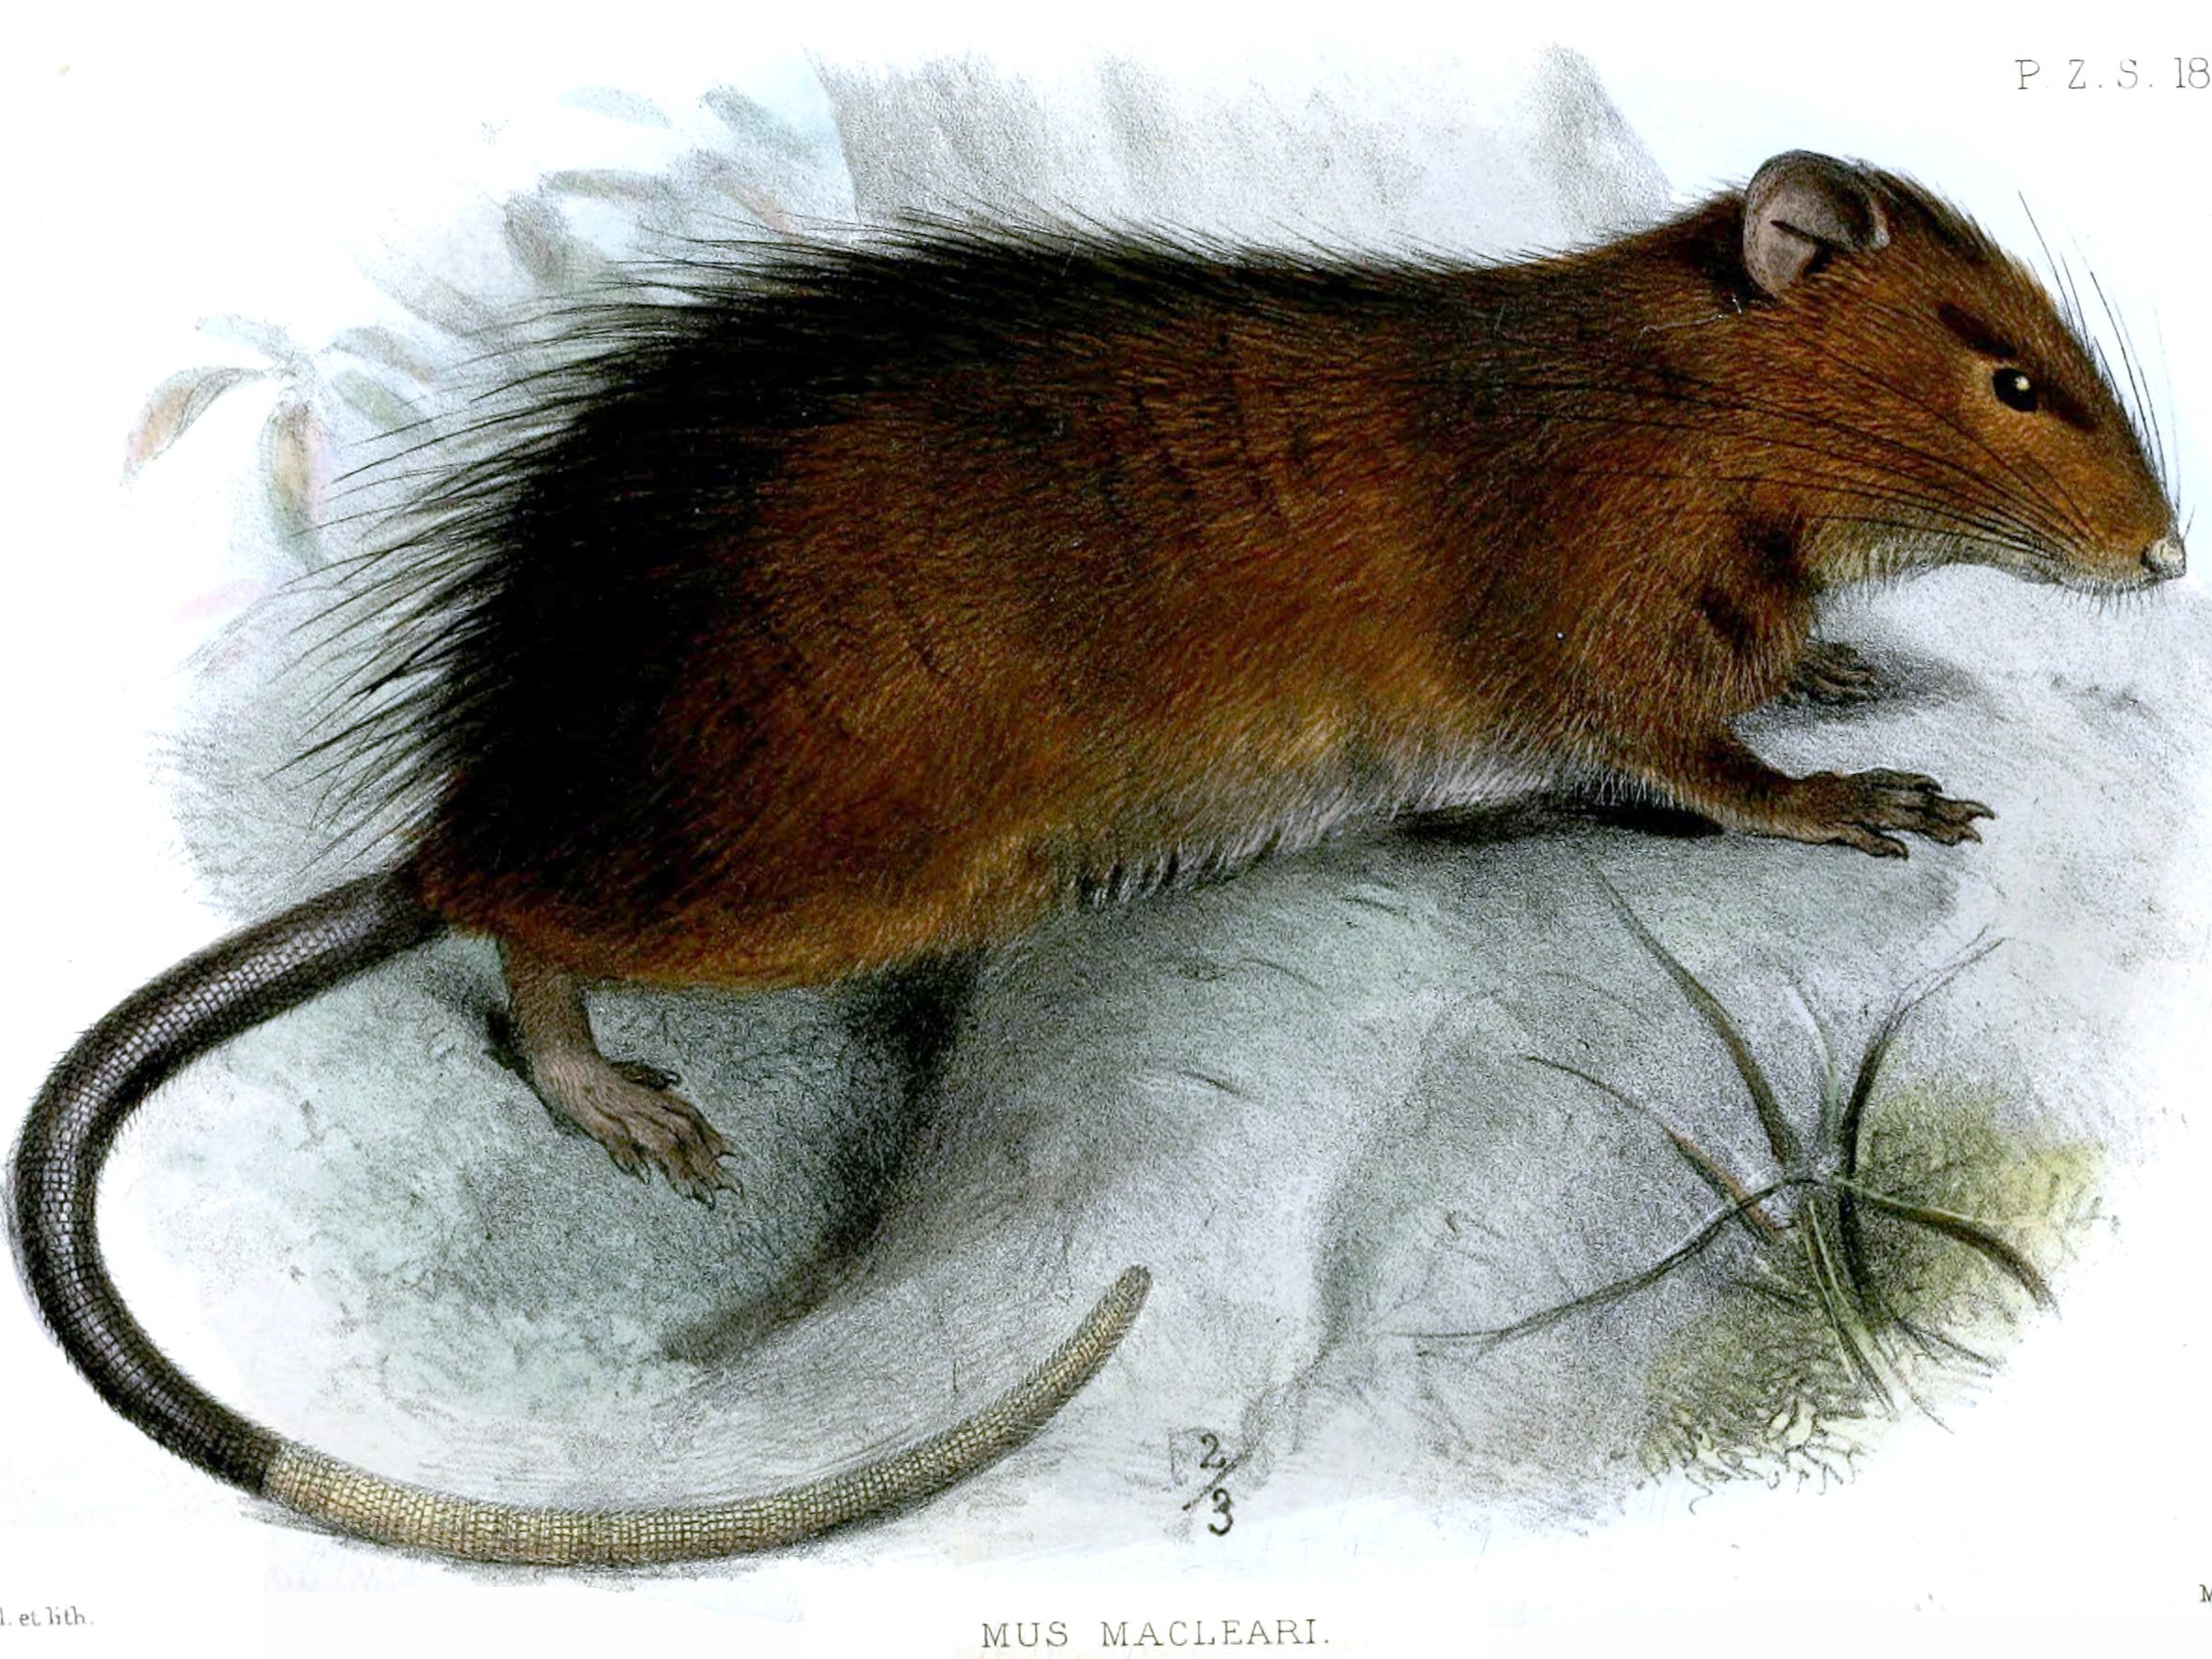 An adventure 120 years in the making: The Christmas Island rat was wiped out by European diseases in 1903